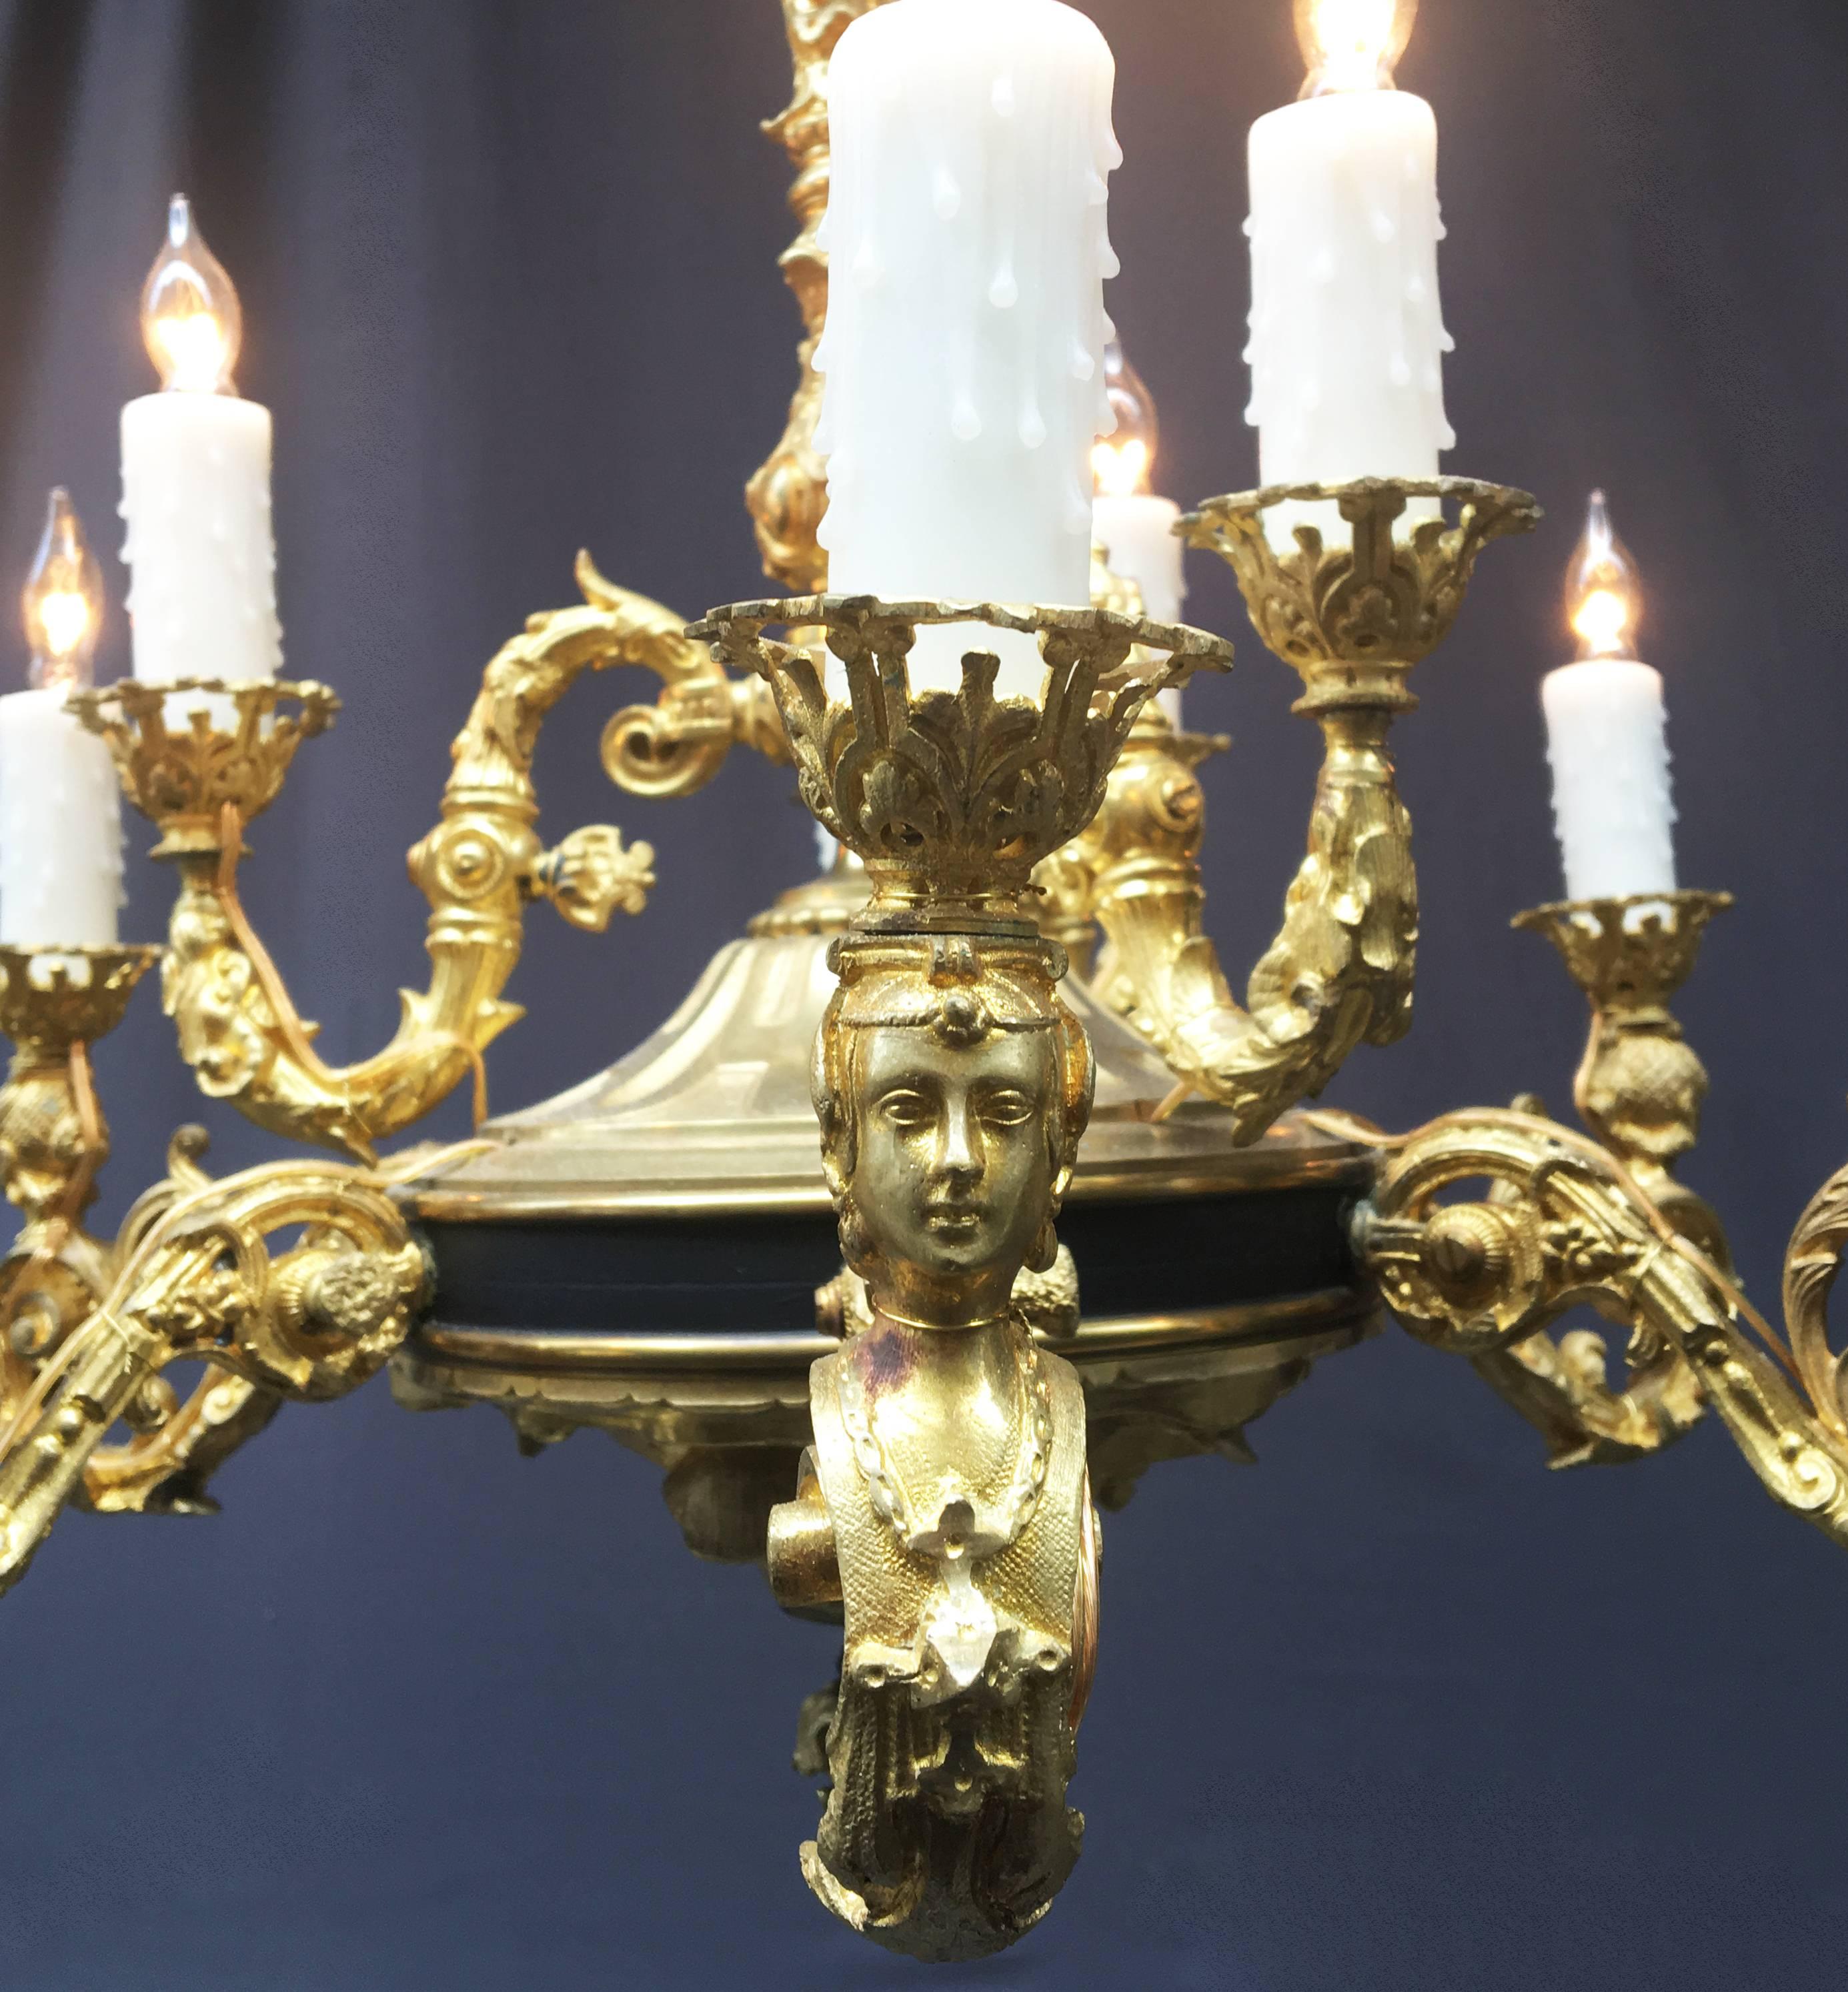 This mid-19th century French gasolier has exquisite detail. Each arm has a single gas valve. Chandelier is doré bronze and patinated.

Chandelier has been rewired and electrified. Chain and canopy is included with purchase.